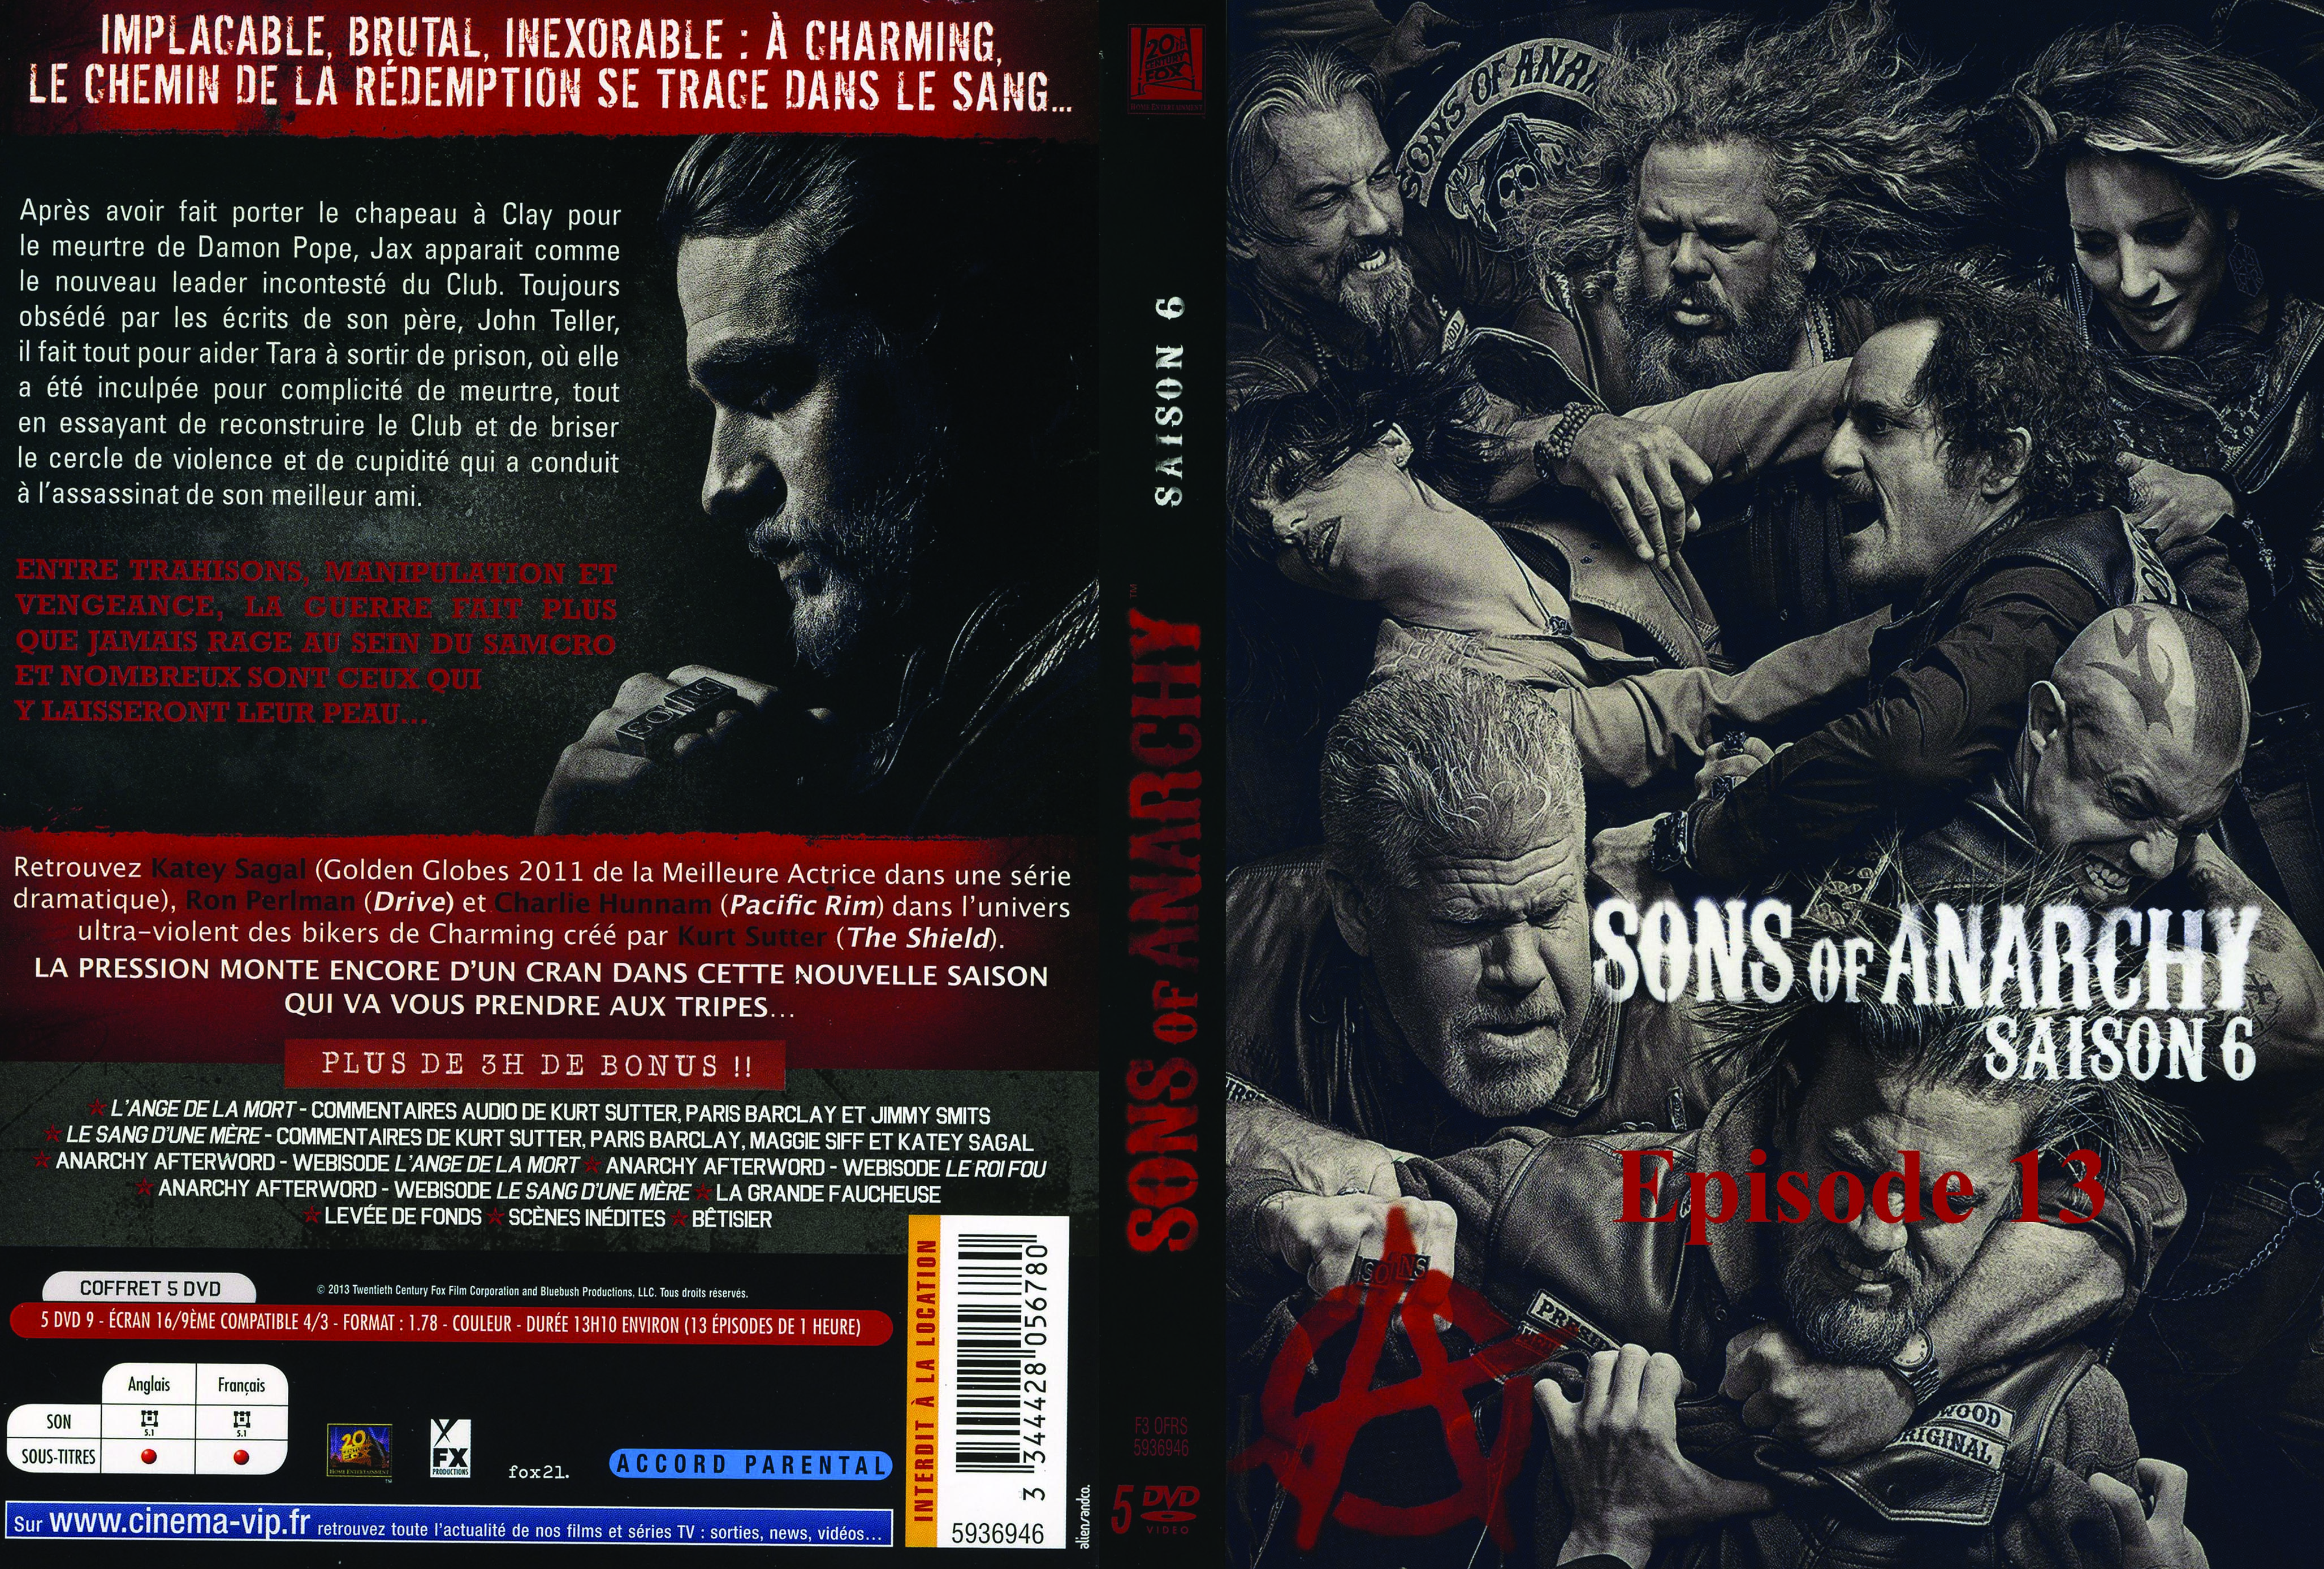 Jaquette DVD Sons of anarchy saison 6 DVD 5 custom